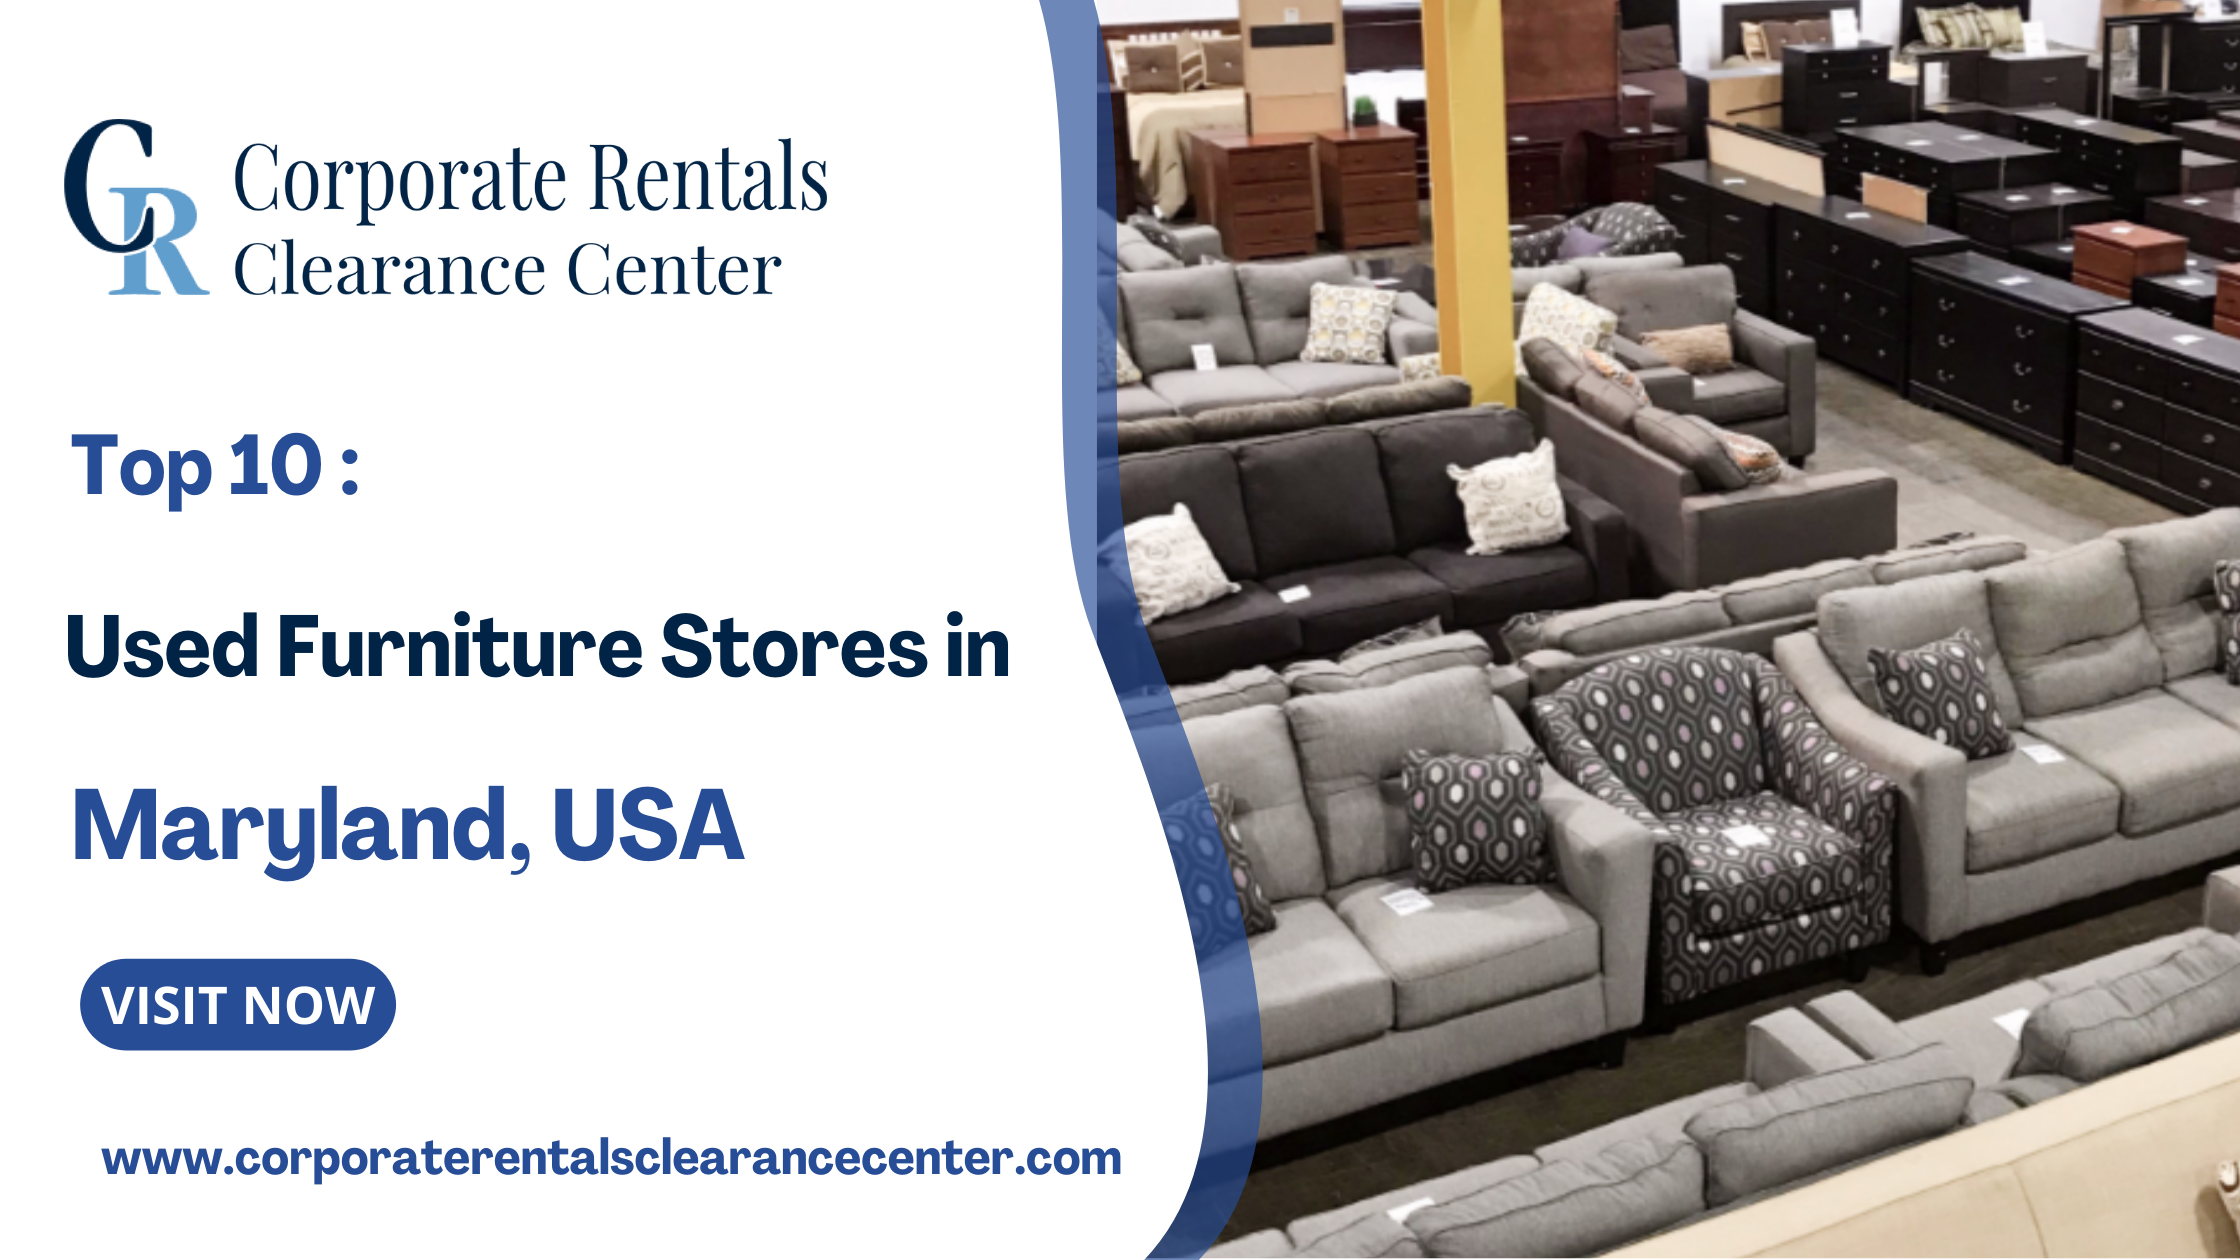 Top 10 Used Furniture Stores in Maryland, USA